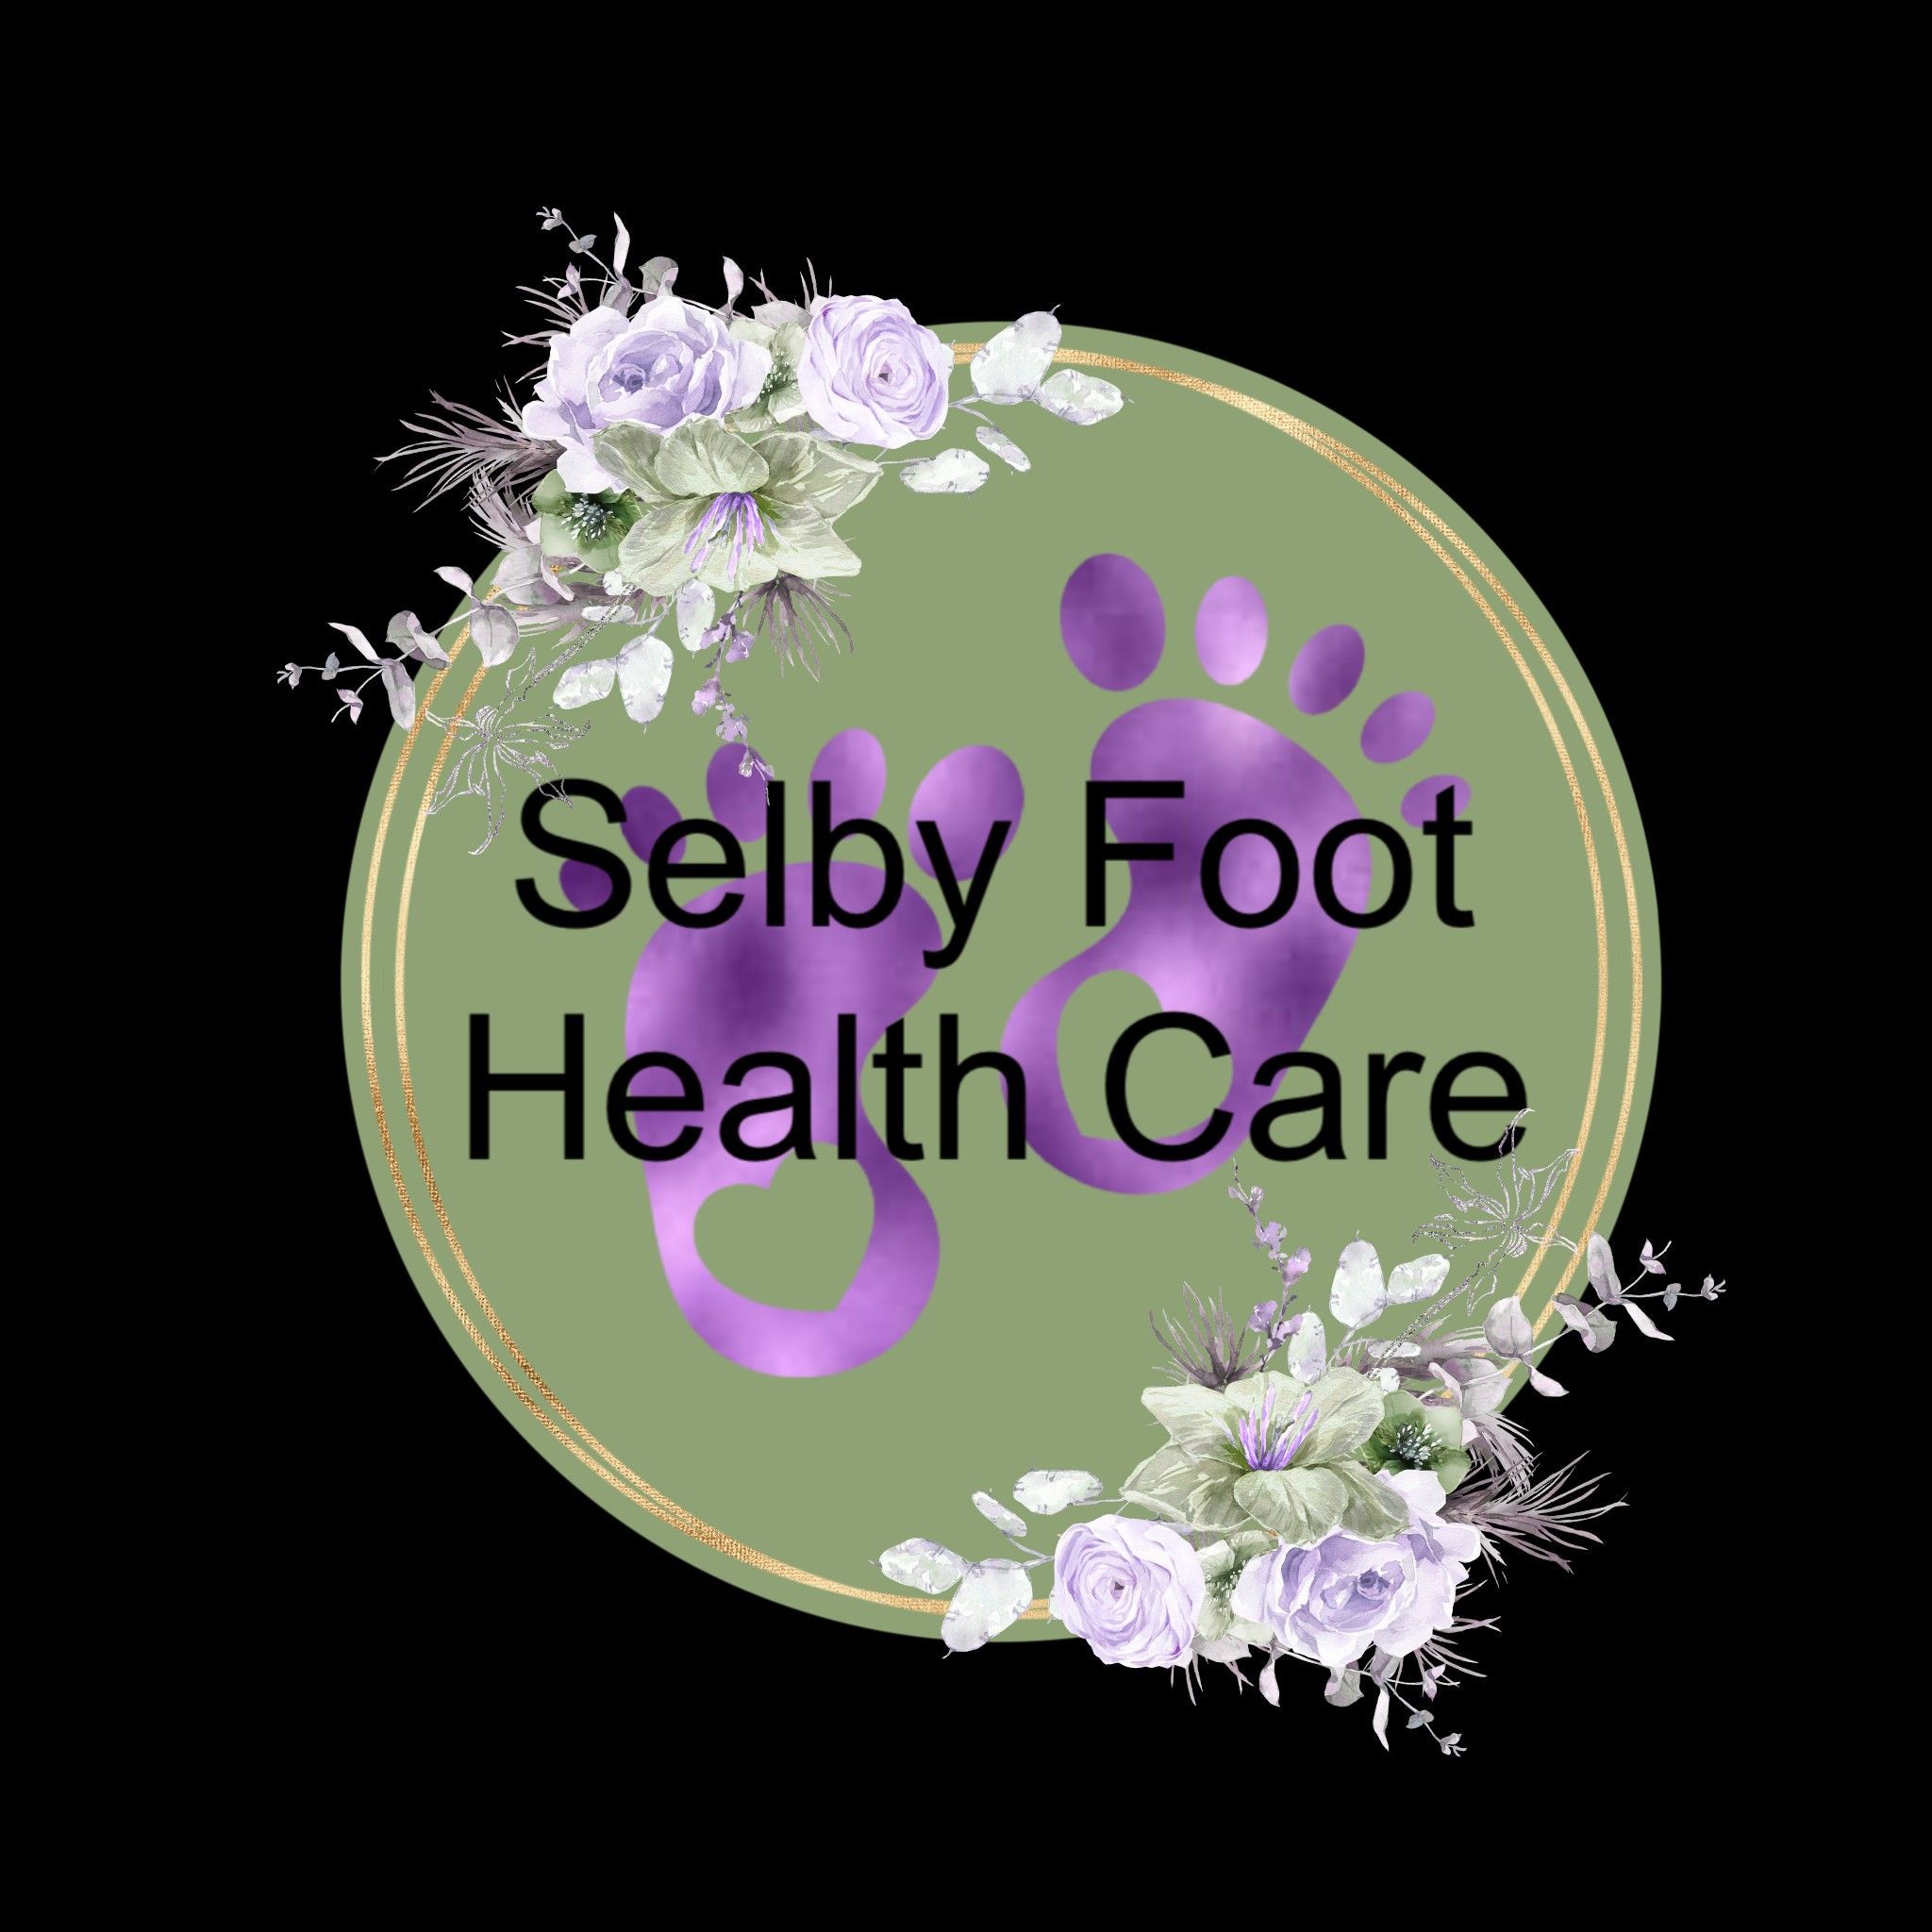 SELBY FOOT HEALTH CARE, 3 Juniper Drive, YO8 8RZ, Selby